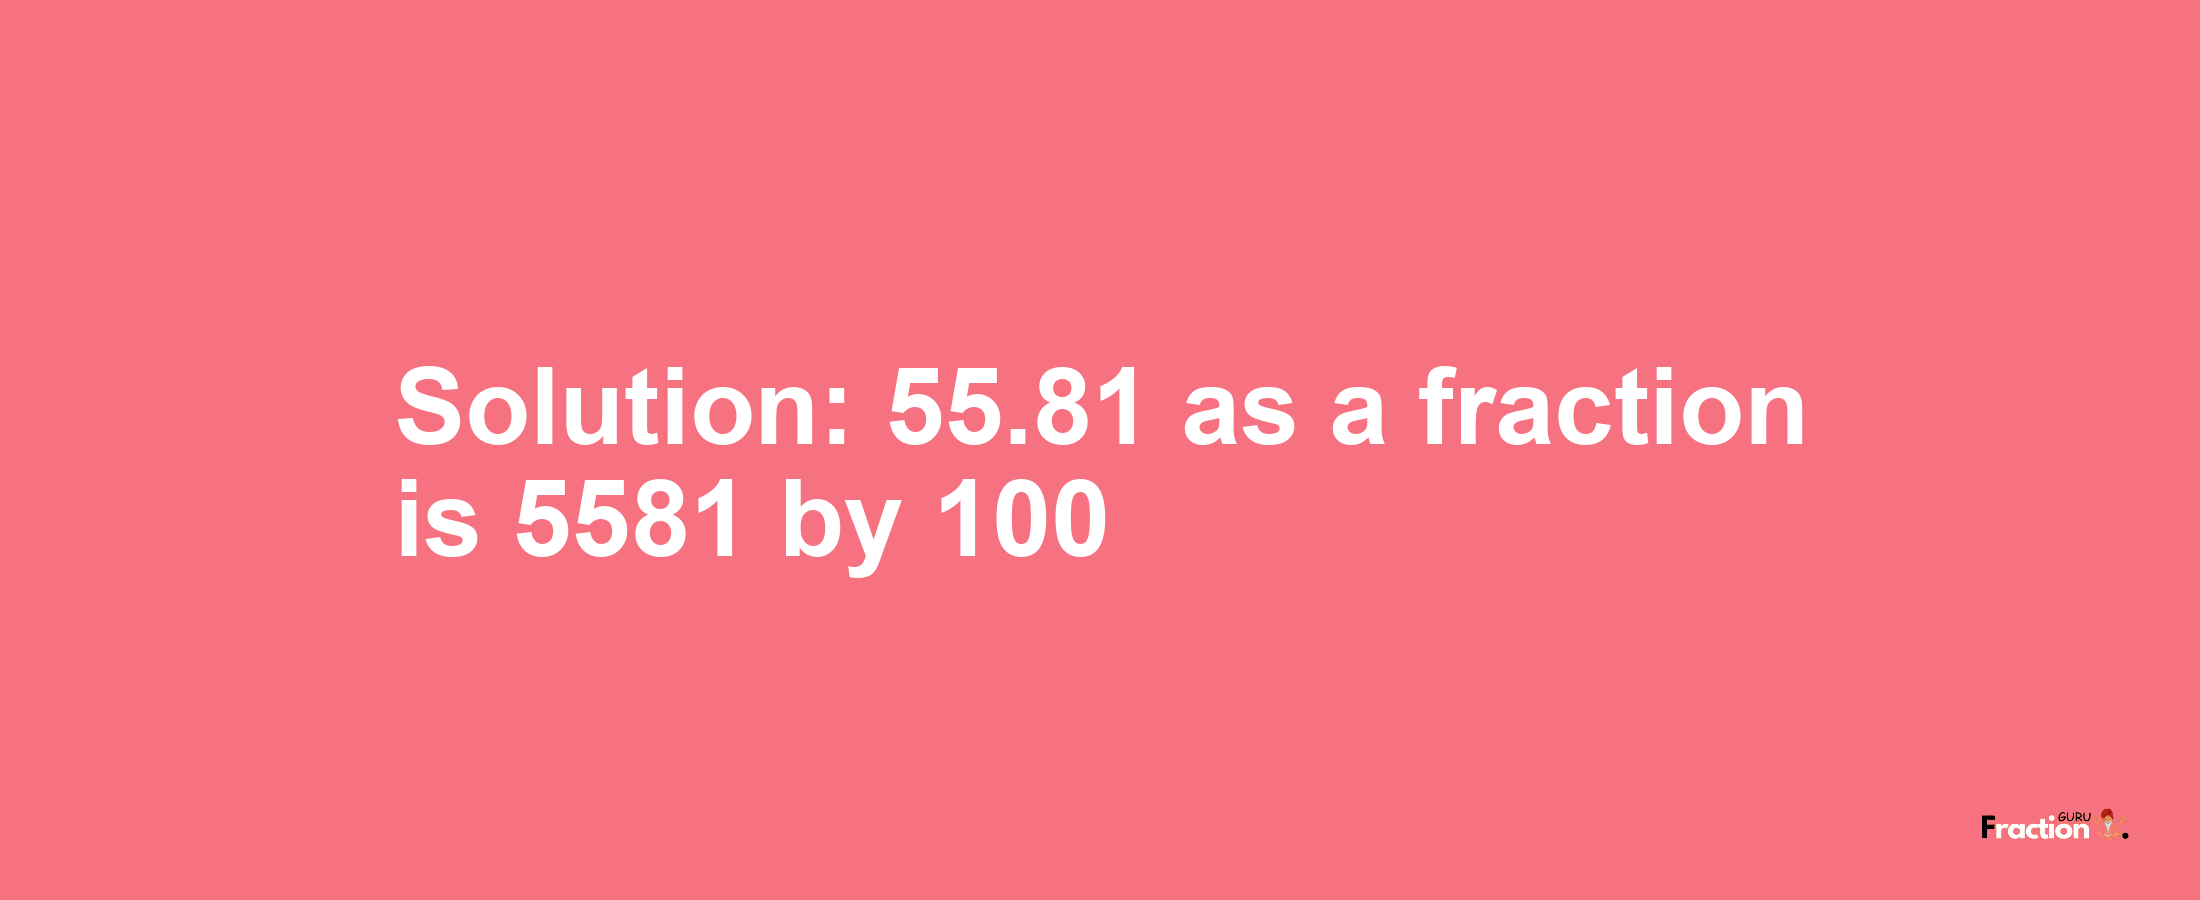 Solution:55.81 as a fraction is 5581/100